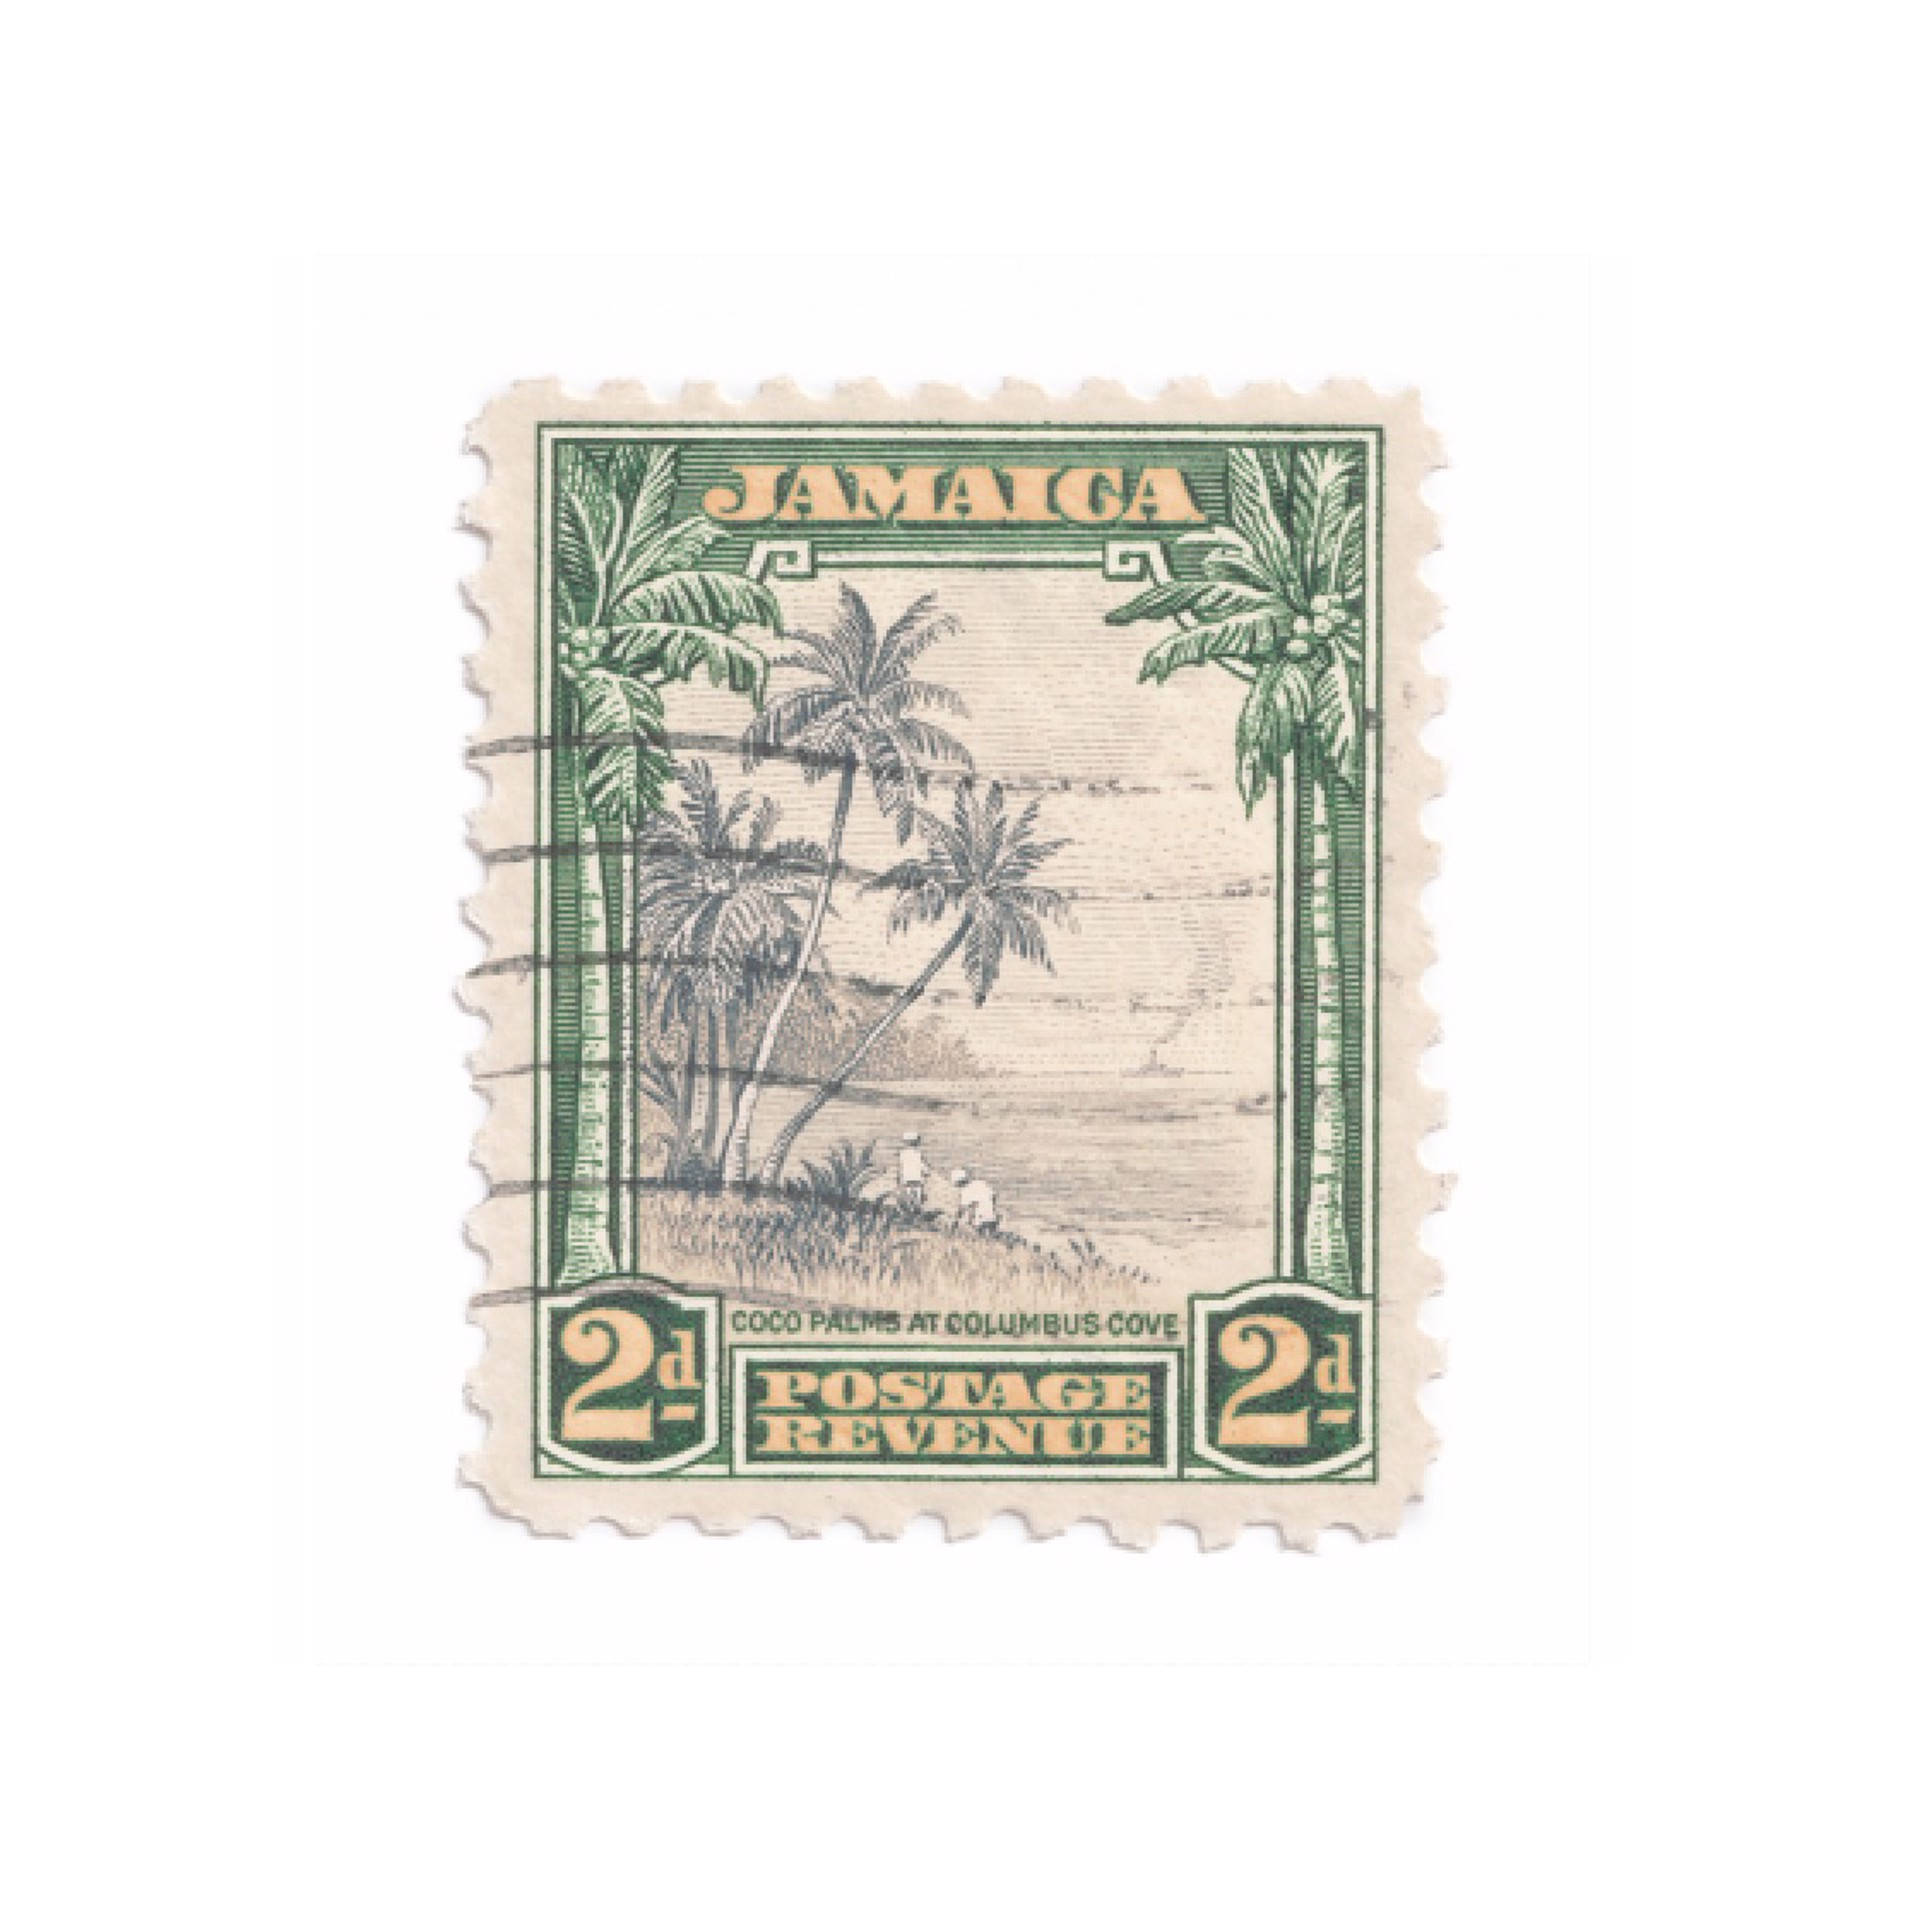 Jamaica 1 by Guy Gee